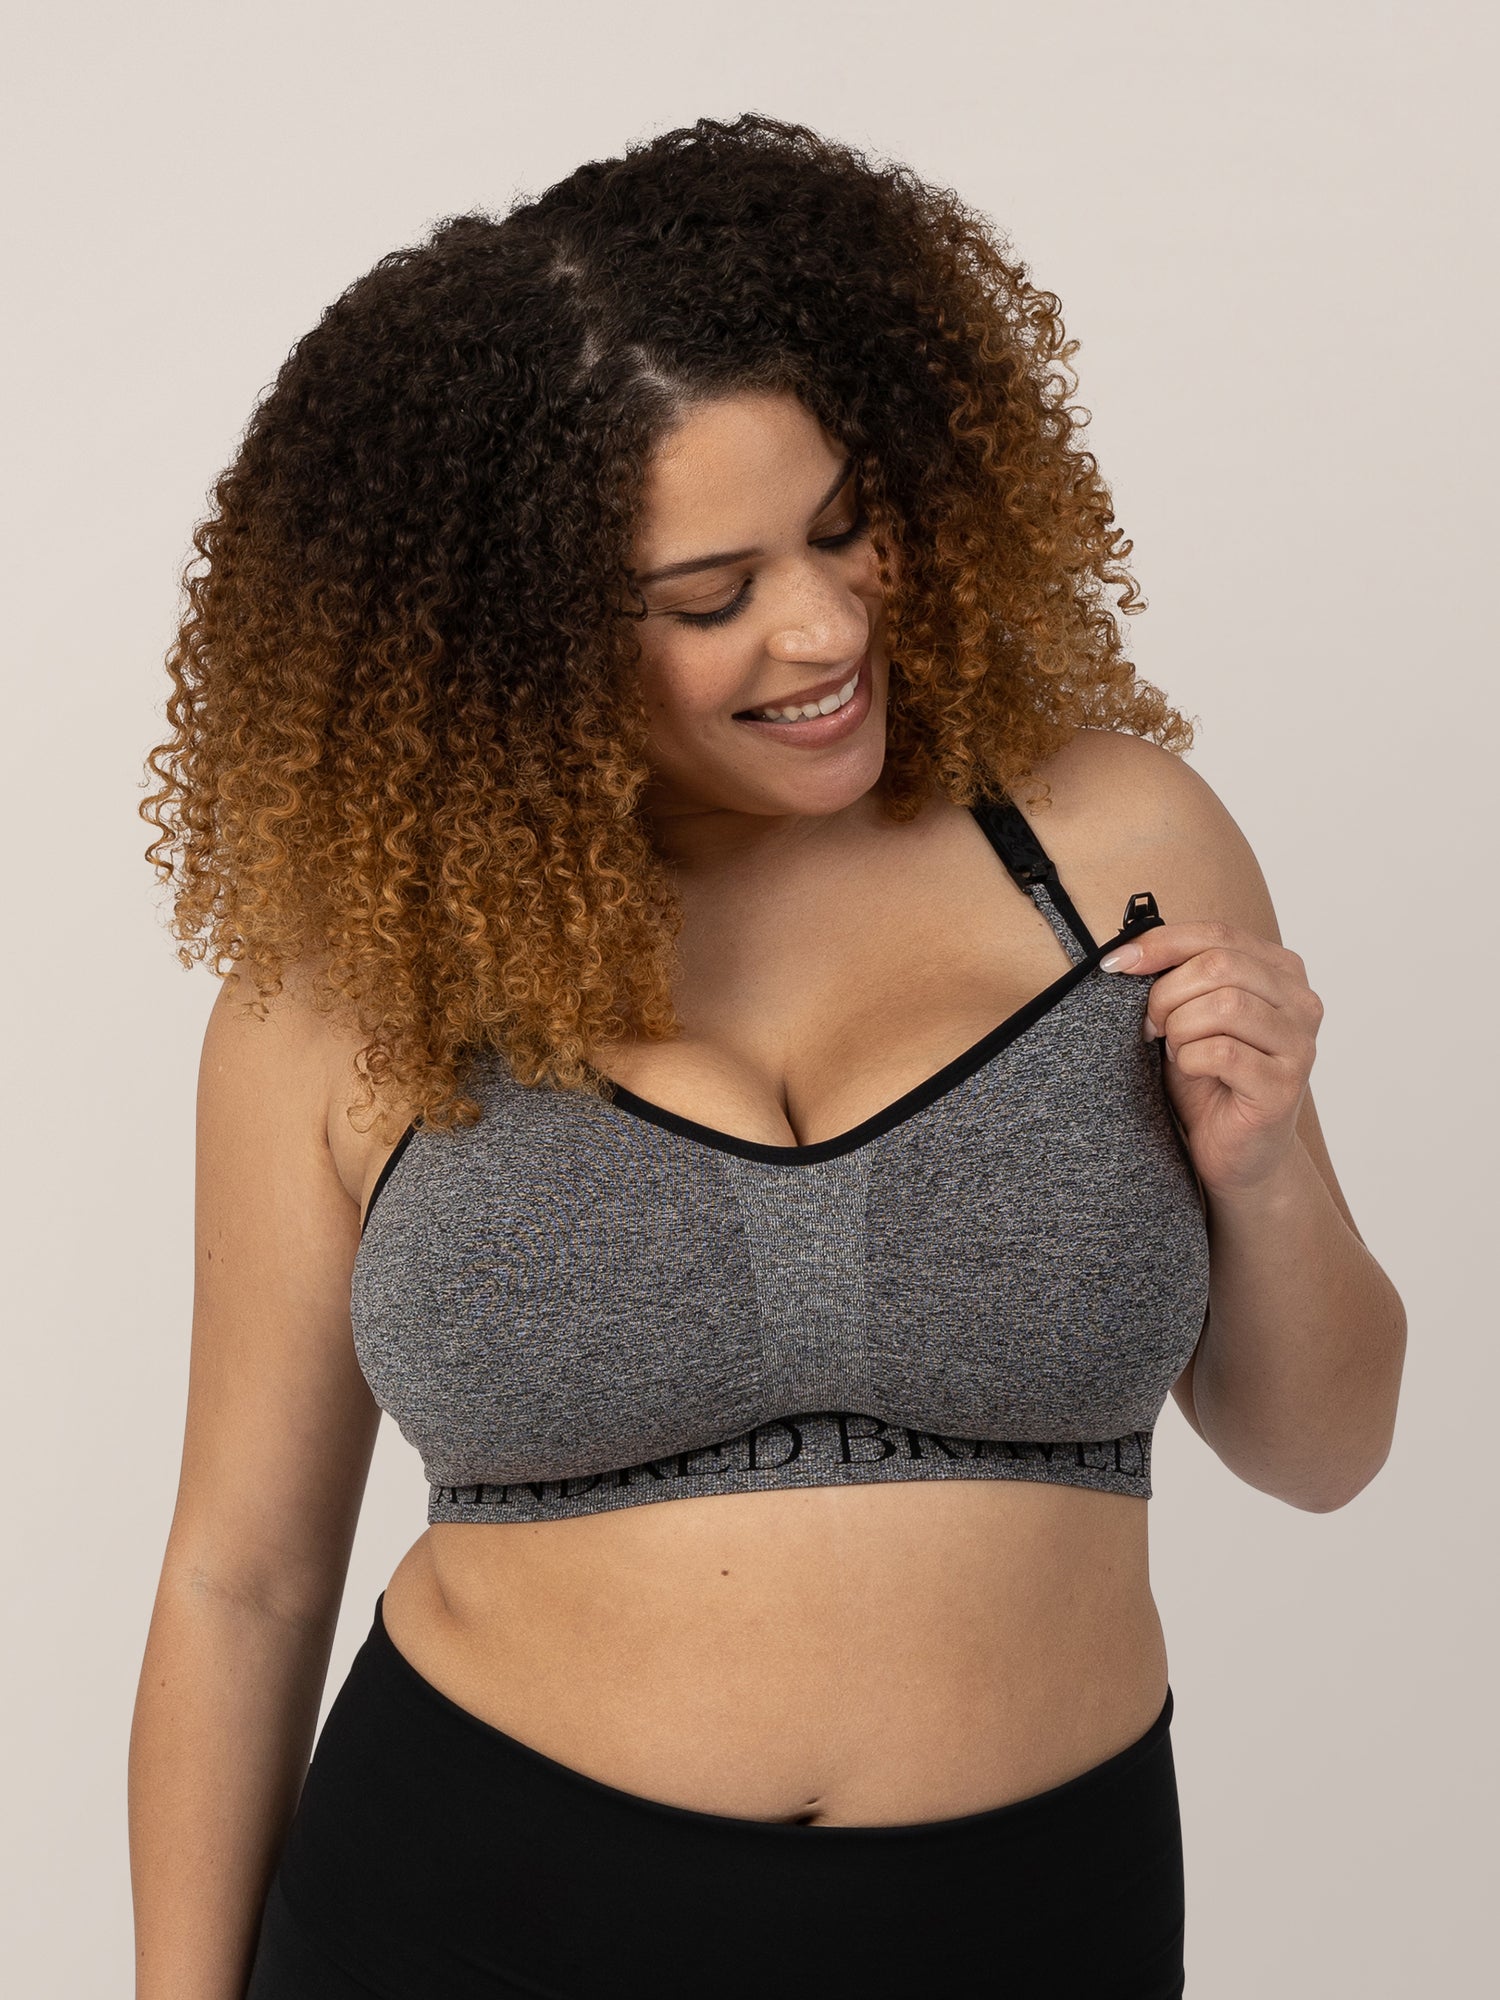 Mum shares the sports bra that supports her large breasts for